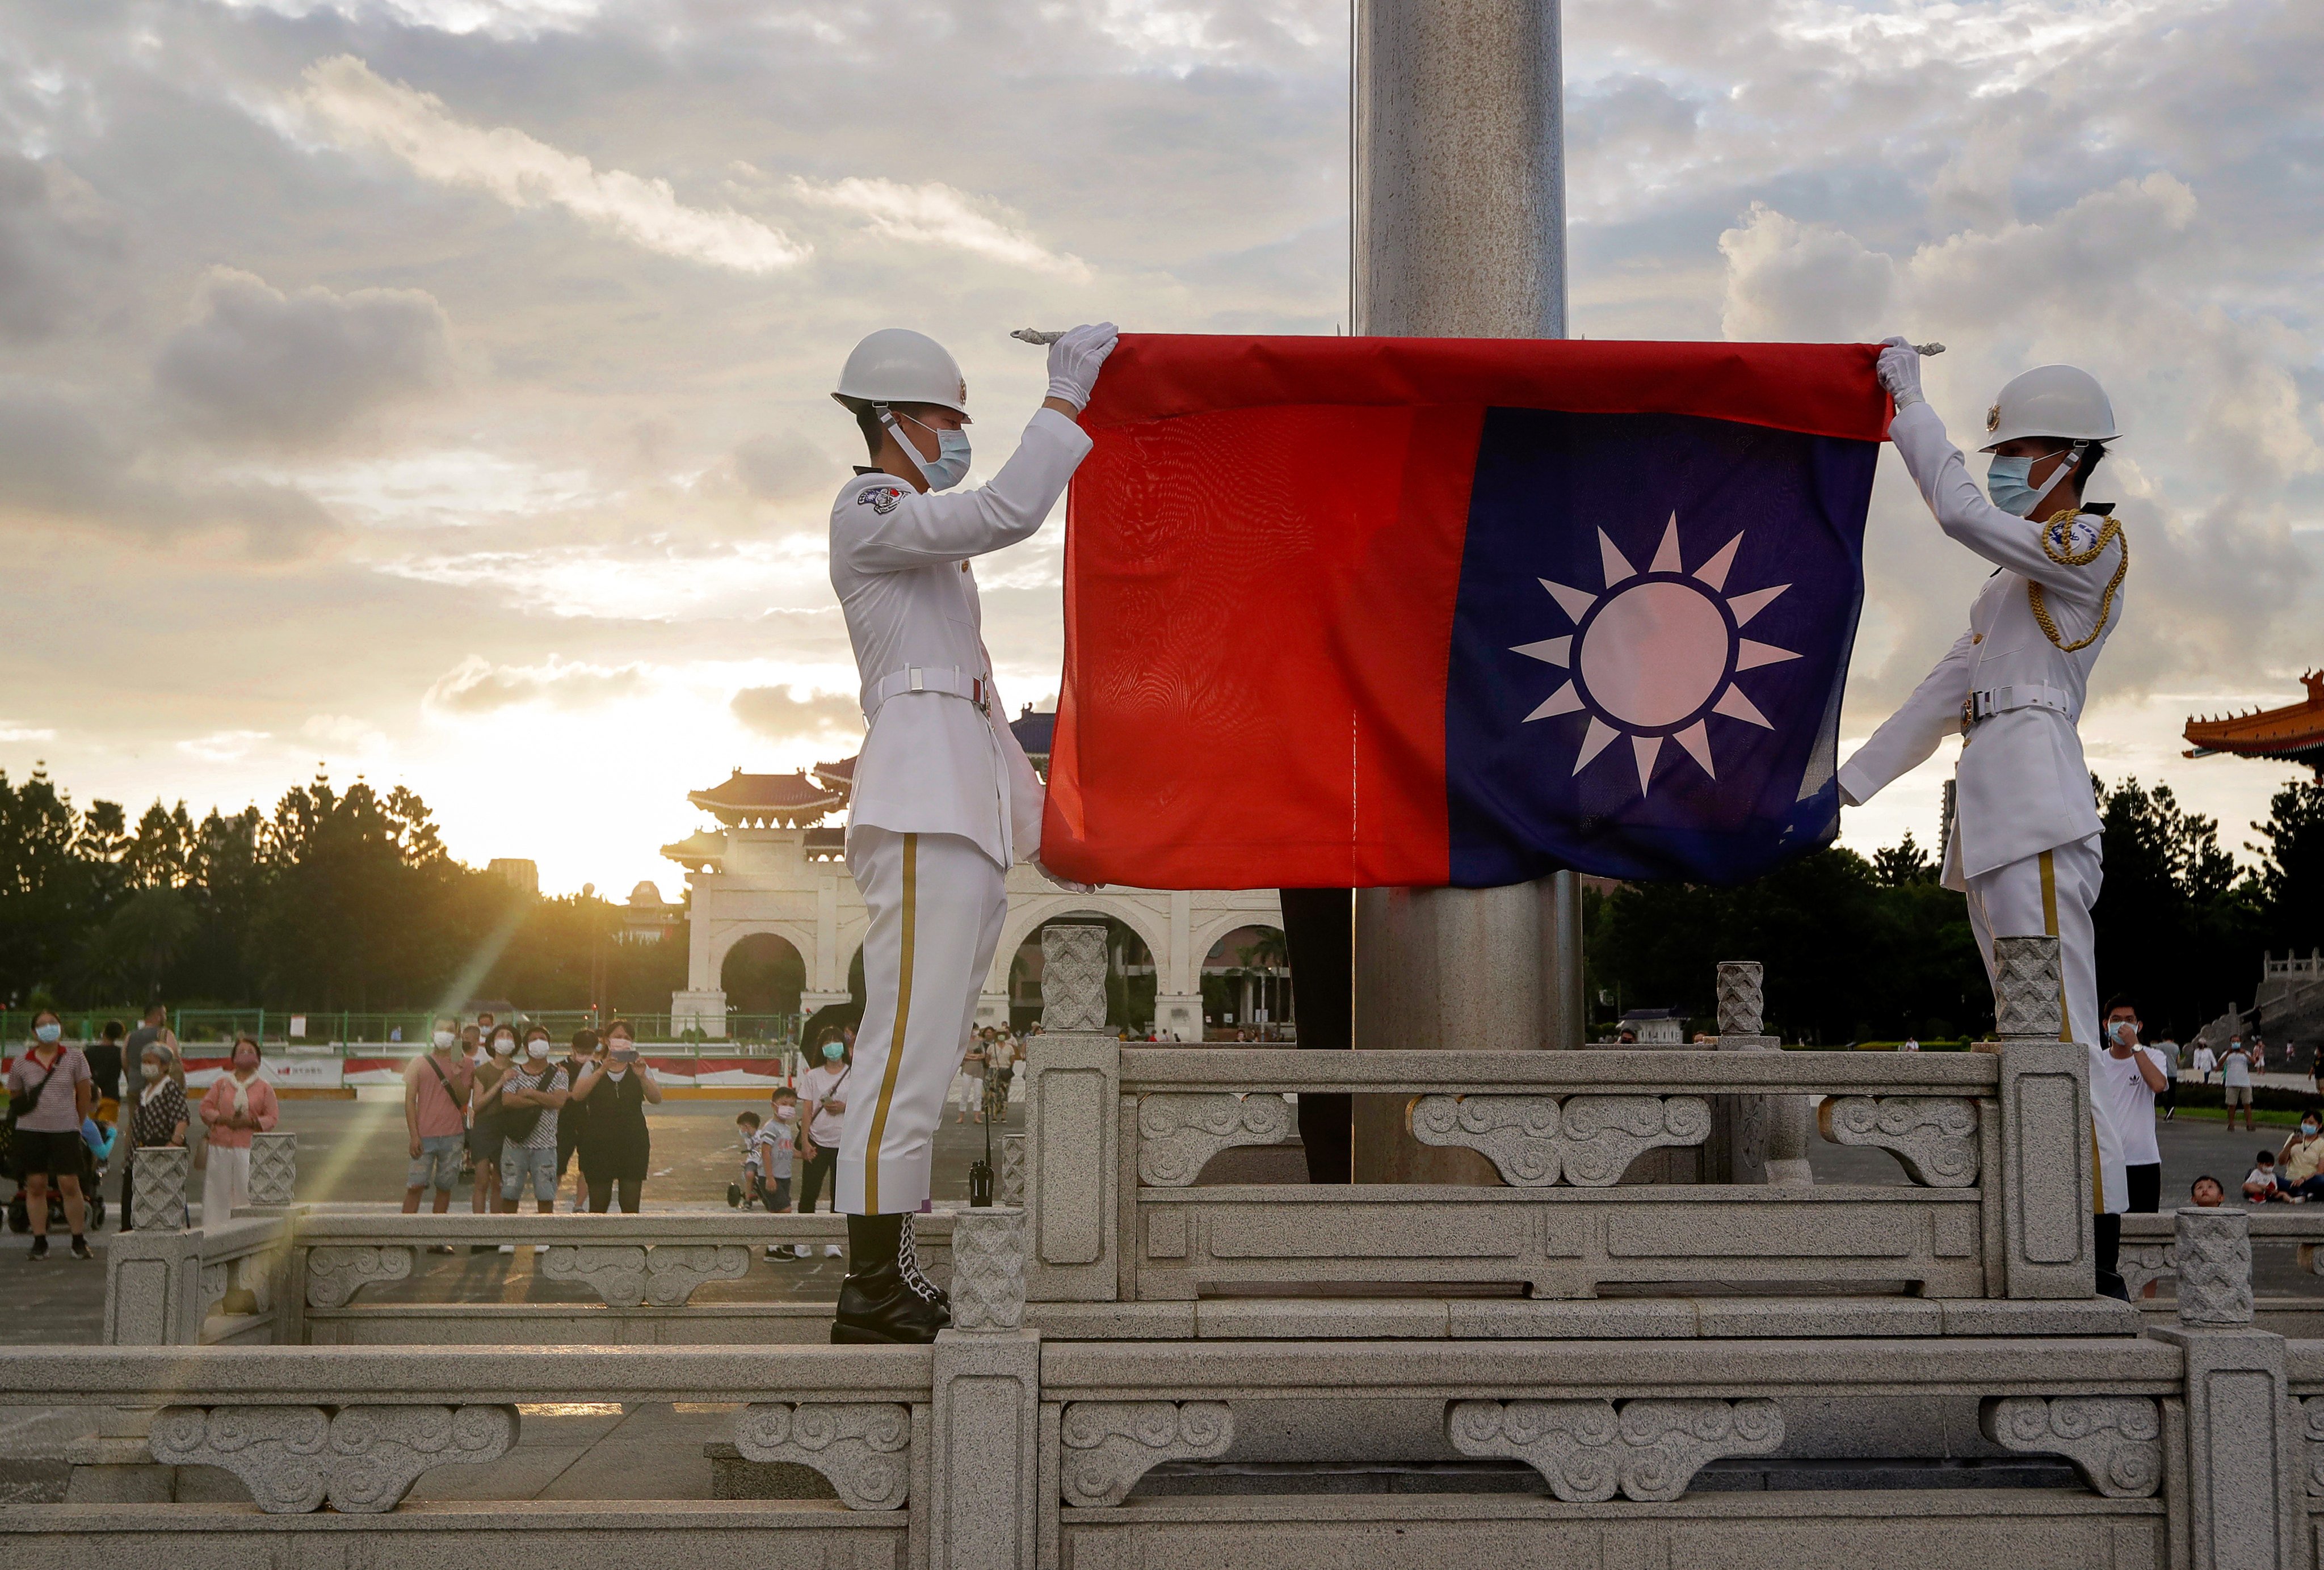 Beijing has vowed to continue with efforts to reunify Taiwan with mainland China. Photo: AP